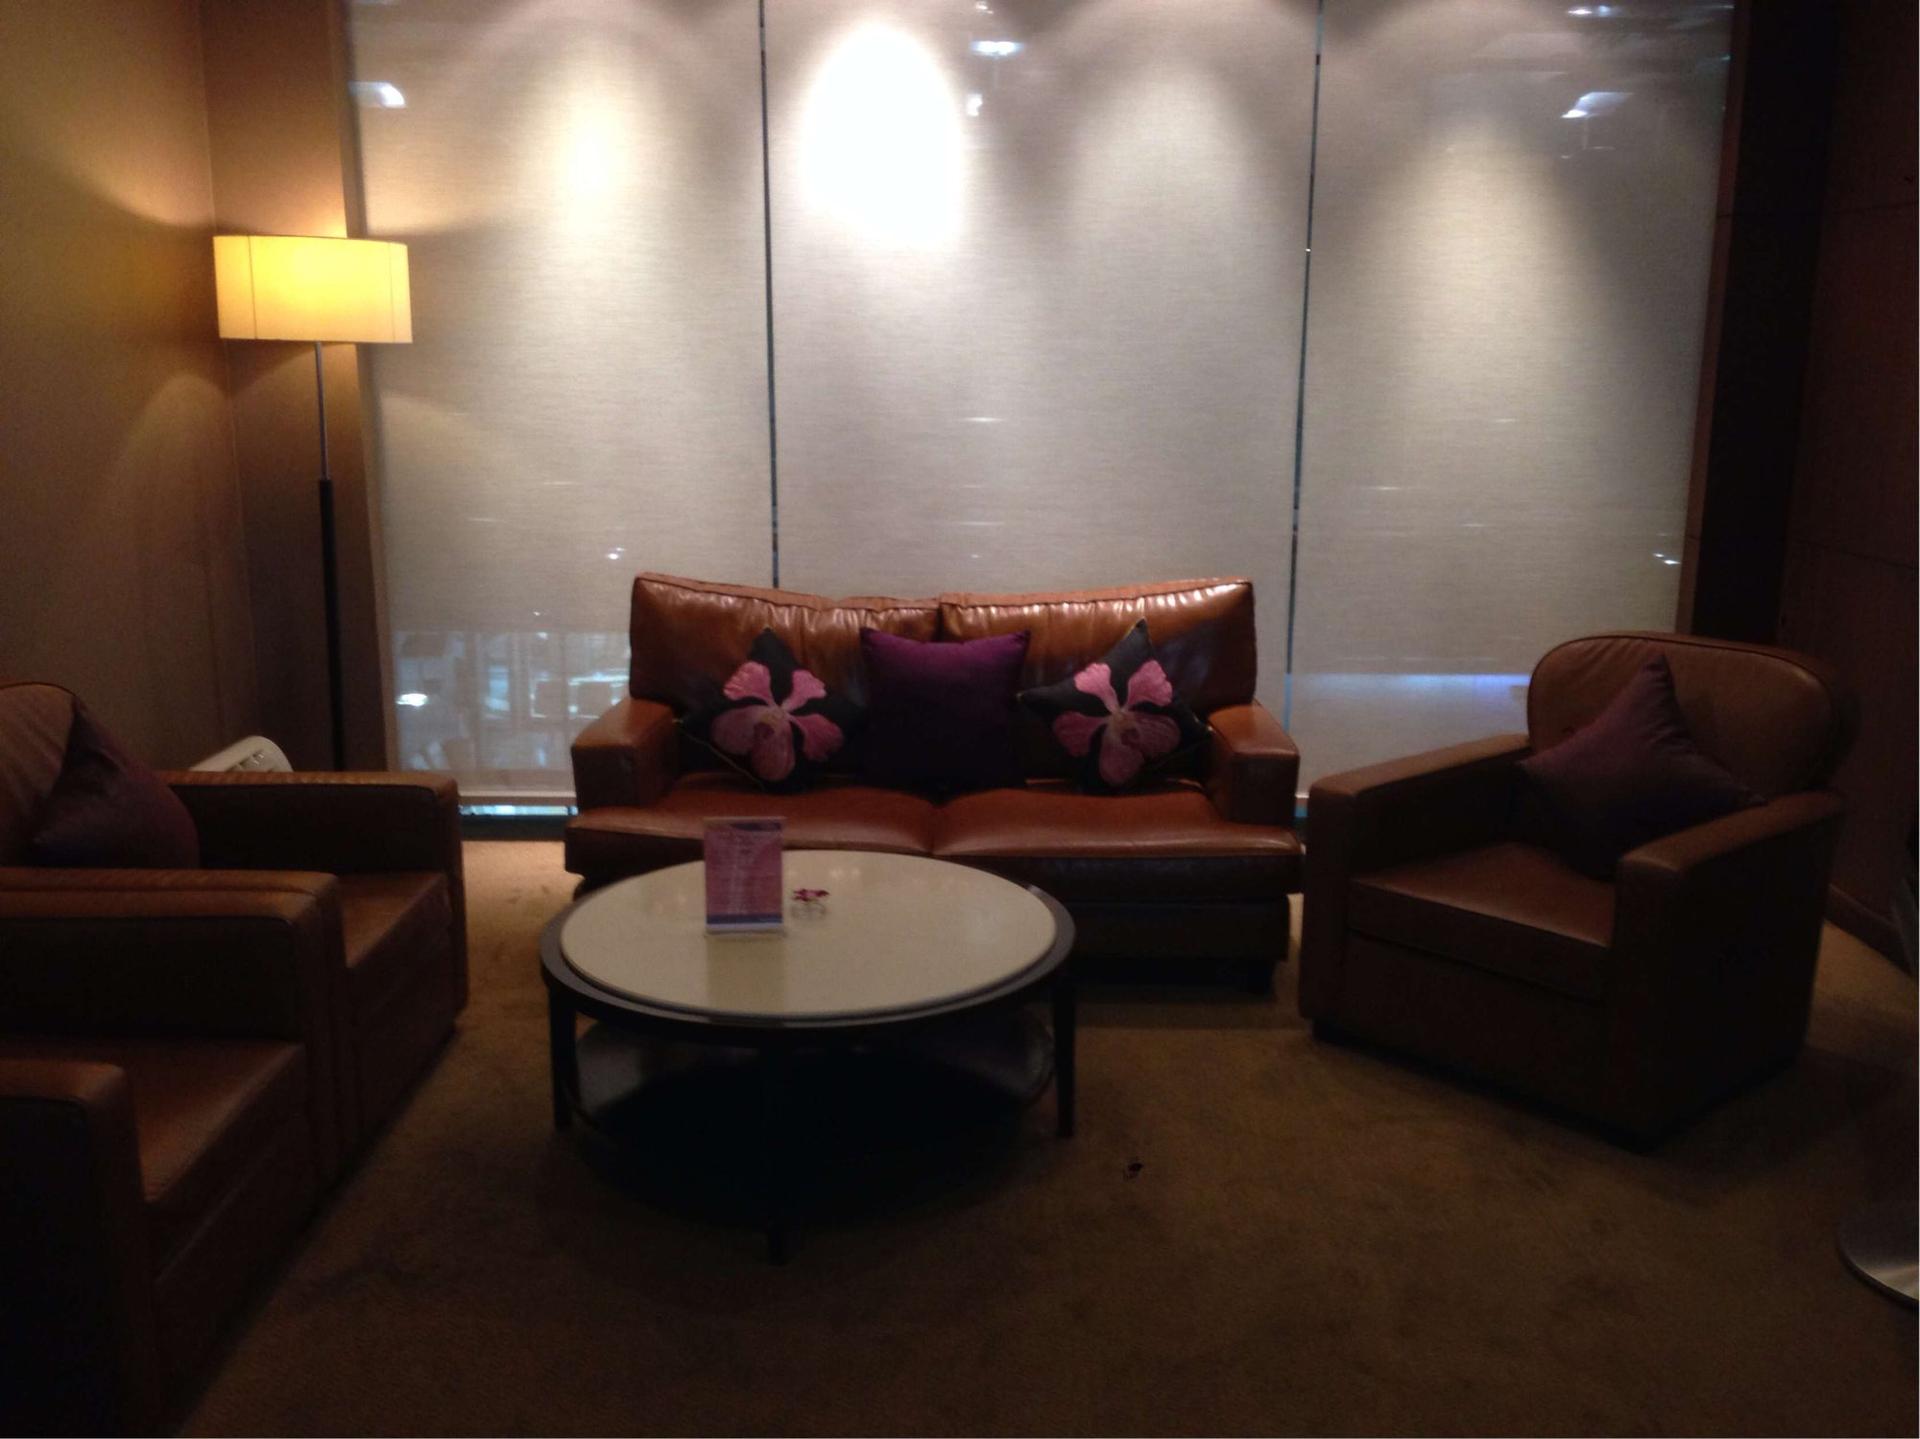 Thai Airways Royal First Class Lounge image 44 of 44